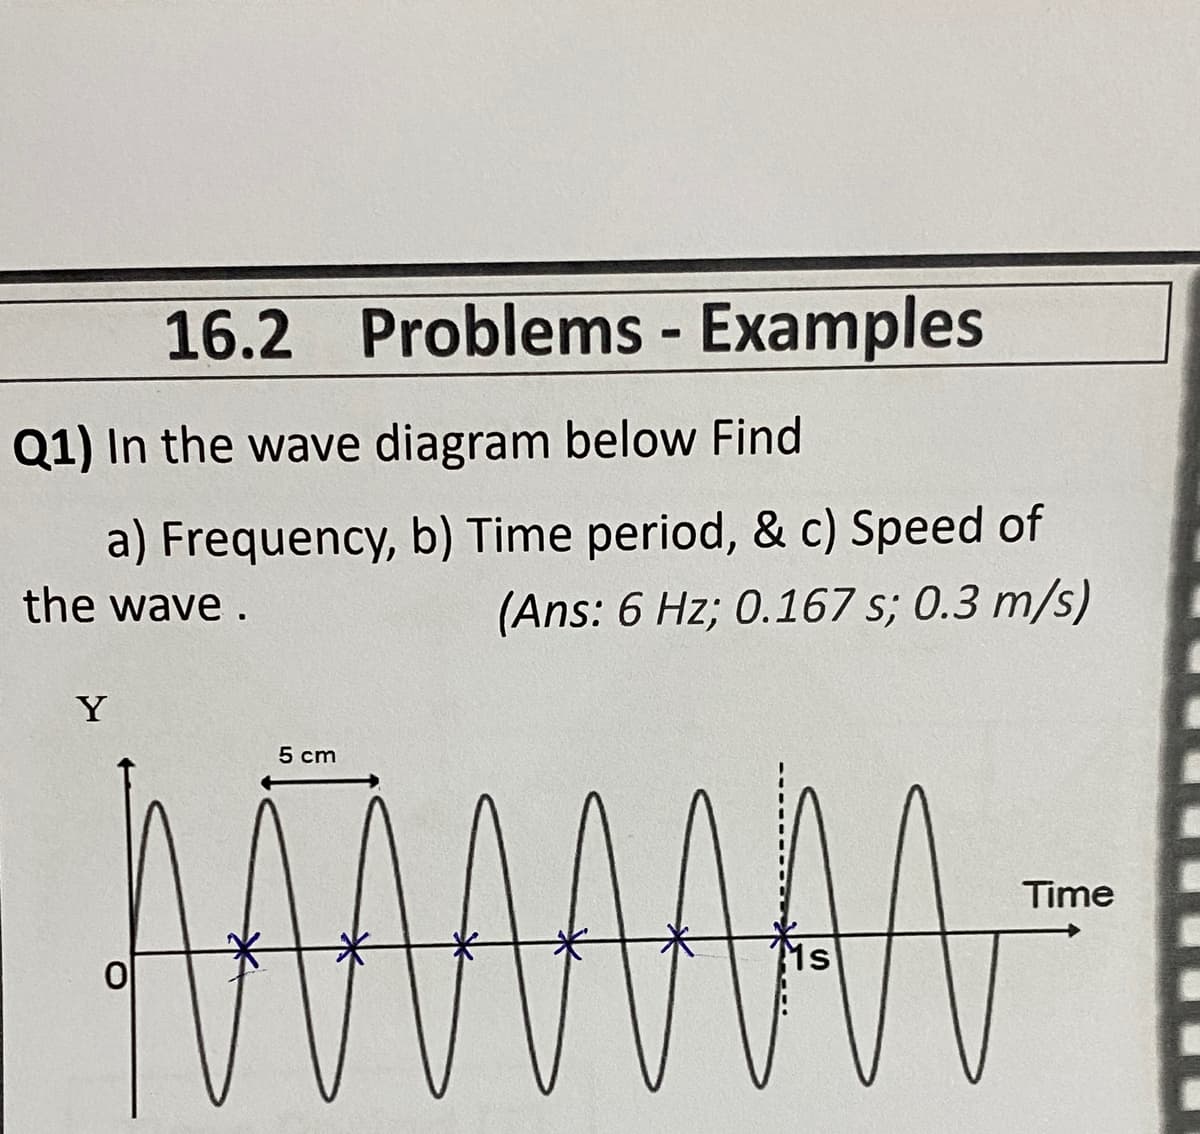 16.2 Problems - Examples
Q1) In the wave diagram below Find
a) Frequency, b) Time period, & c) Speed of
(Ans: 6 Hz; 0.167 s; 0.3 m/s)
the wave .
Y
5 cm
Time
米
Ms
